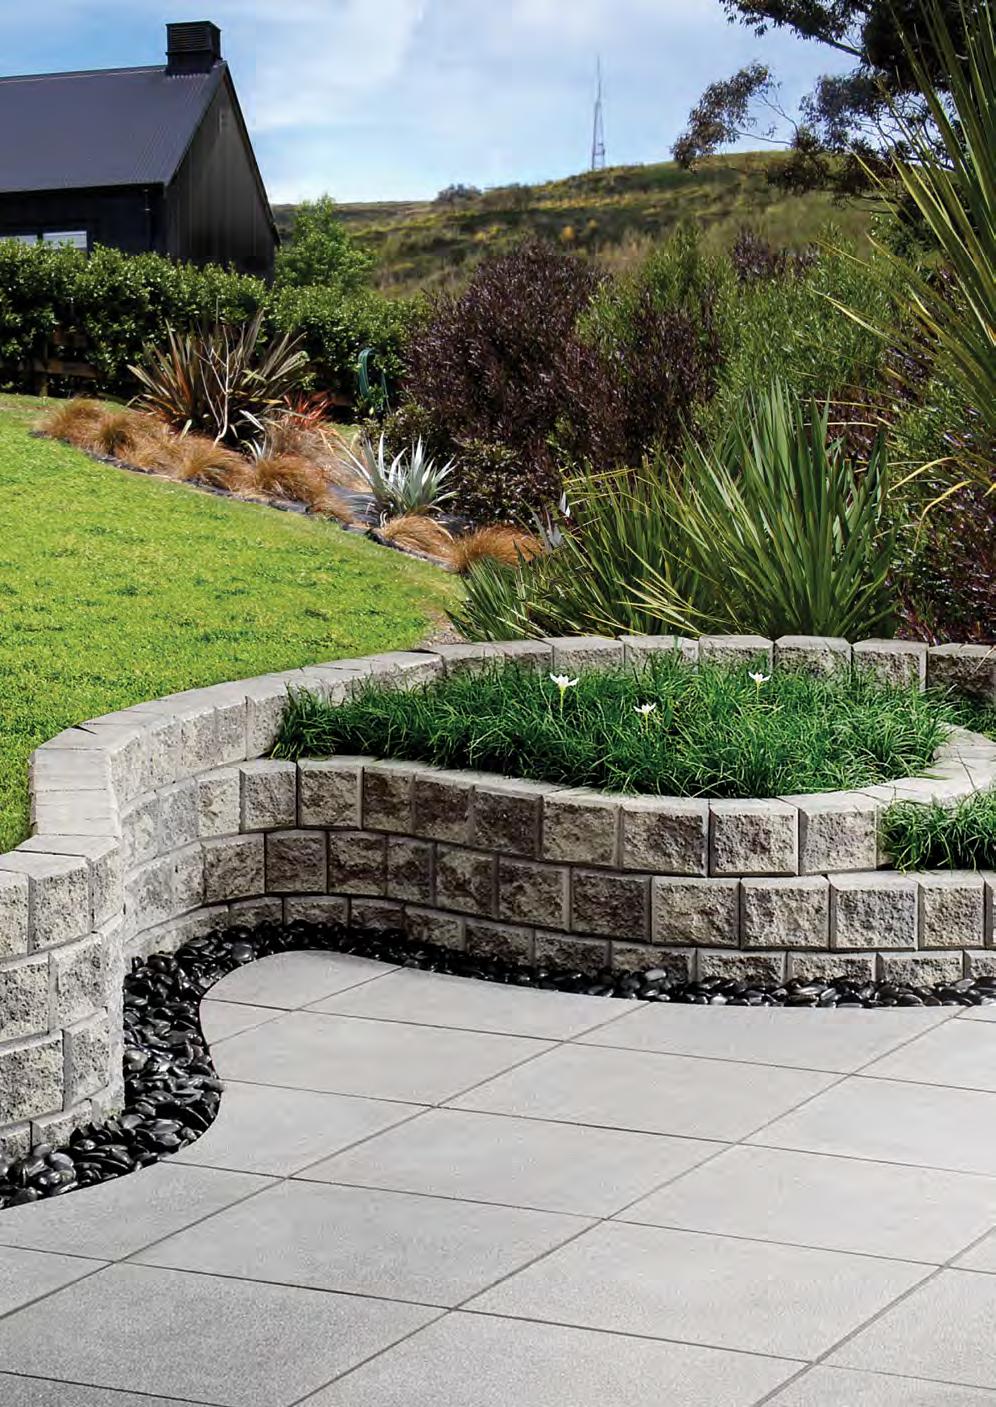 +low retaining 23 And don t forget... check with your council! WITH THE LARGE RANGE OF FIRTH RETAINING WALLS, YOUR OUTDOOR LIVING DESIGN POSSIBILITIES ARE VIRTUALLY ENDLESS.